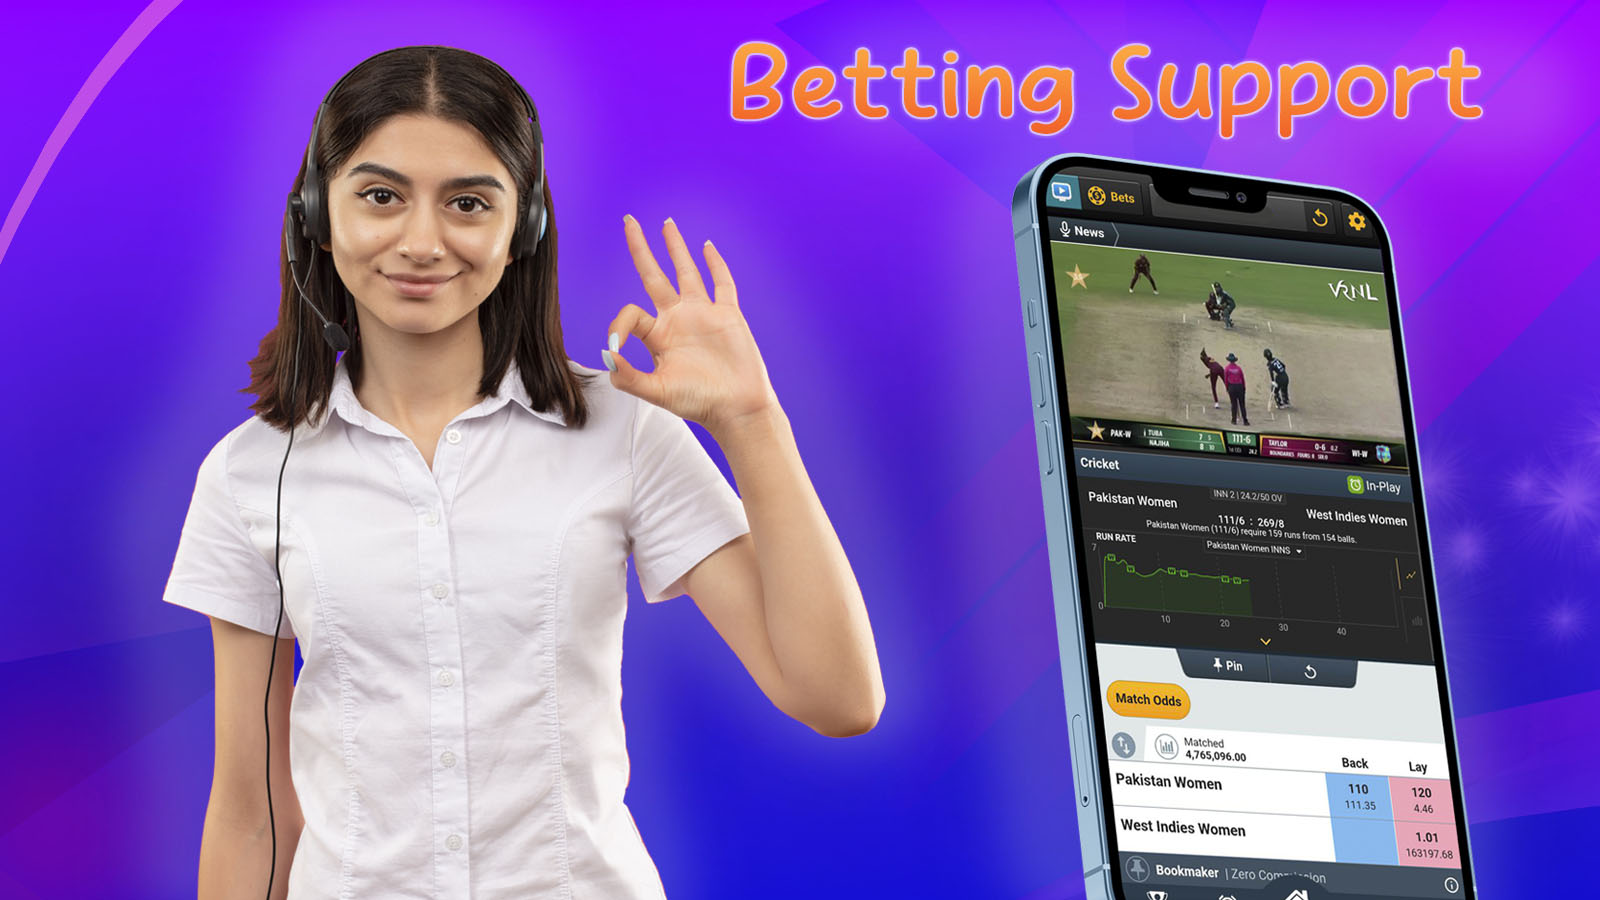 Nagad88 provides quality betting support